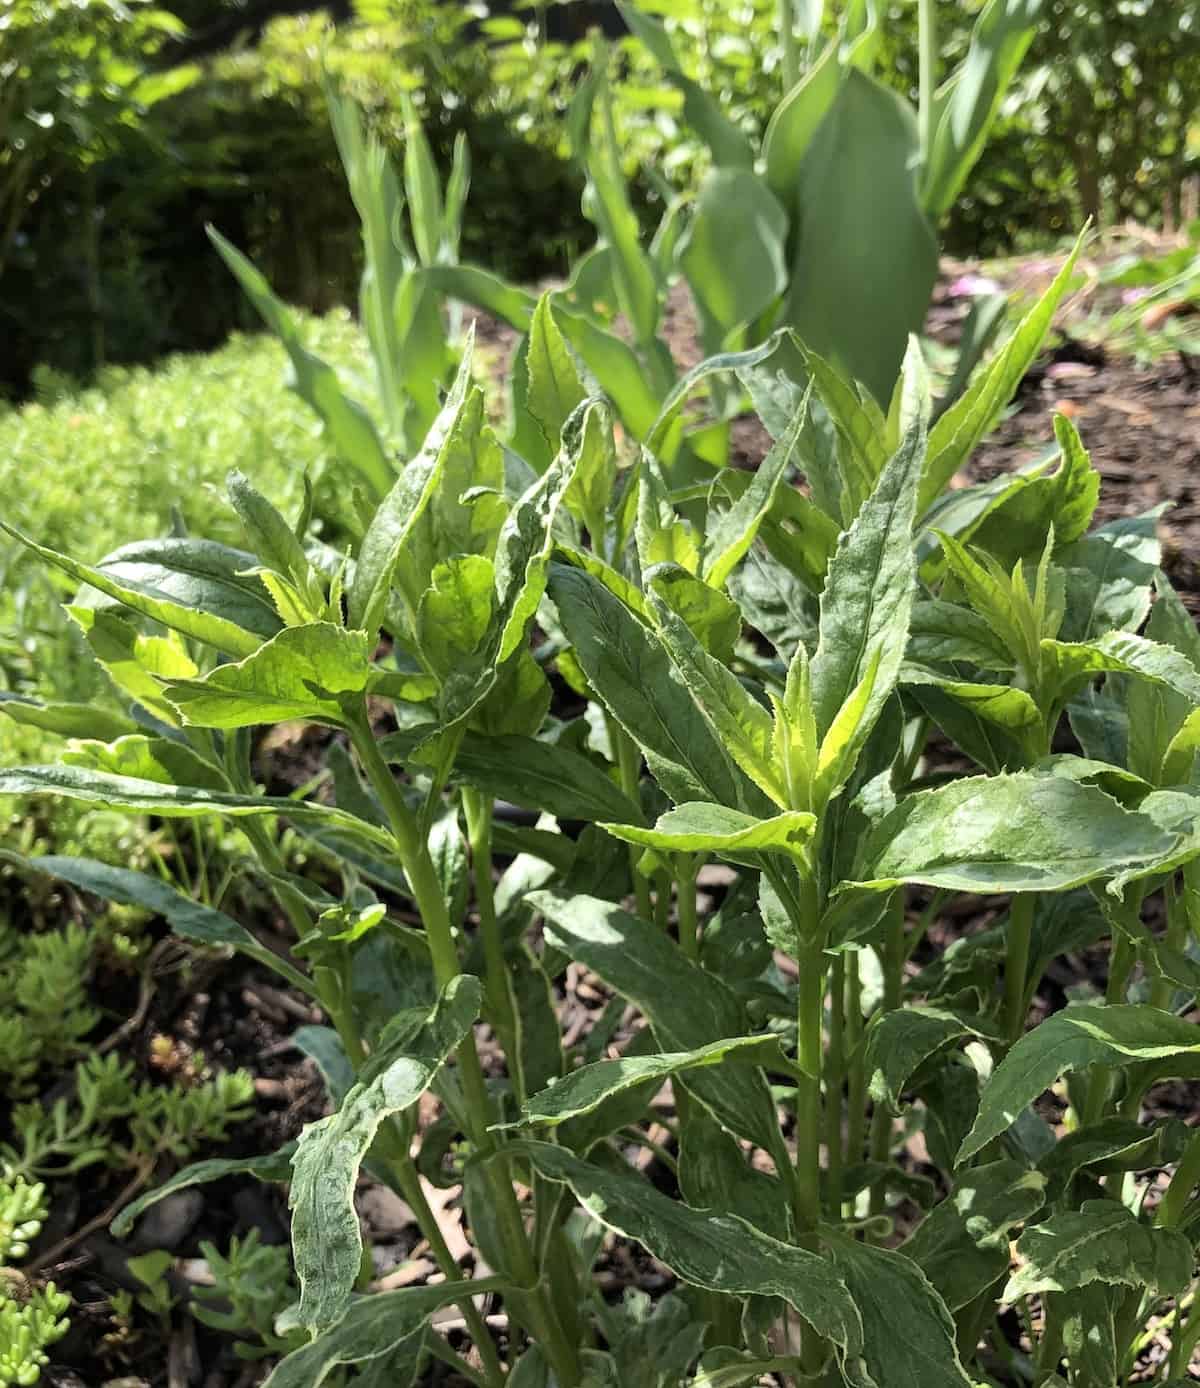 Veronica speedwell foliage in may before blooming with tulips behind it